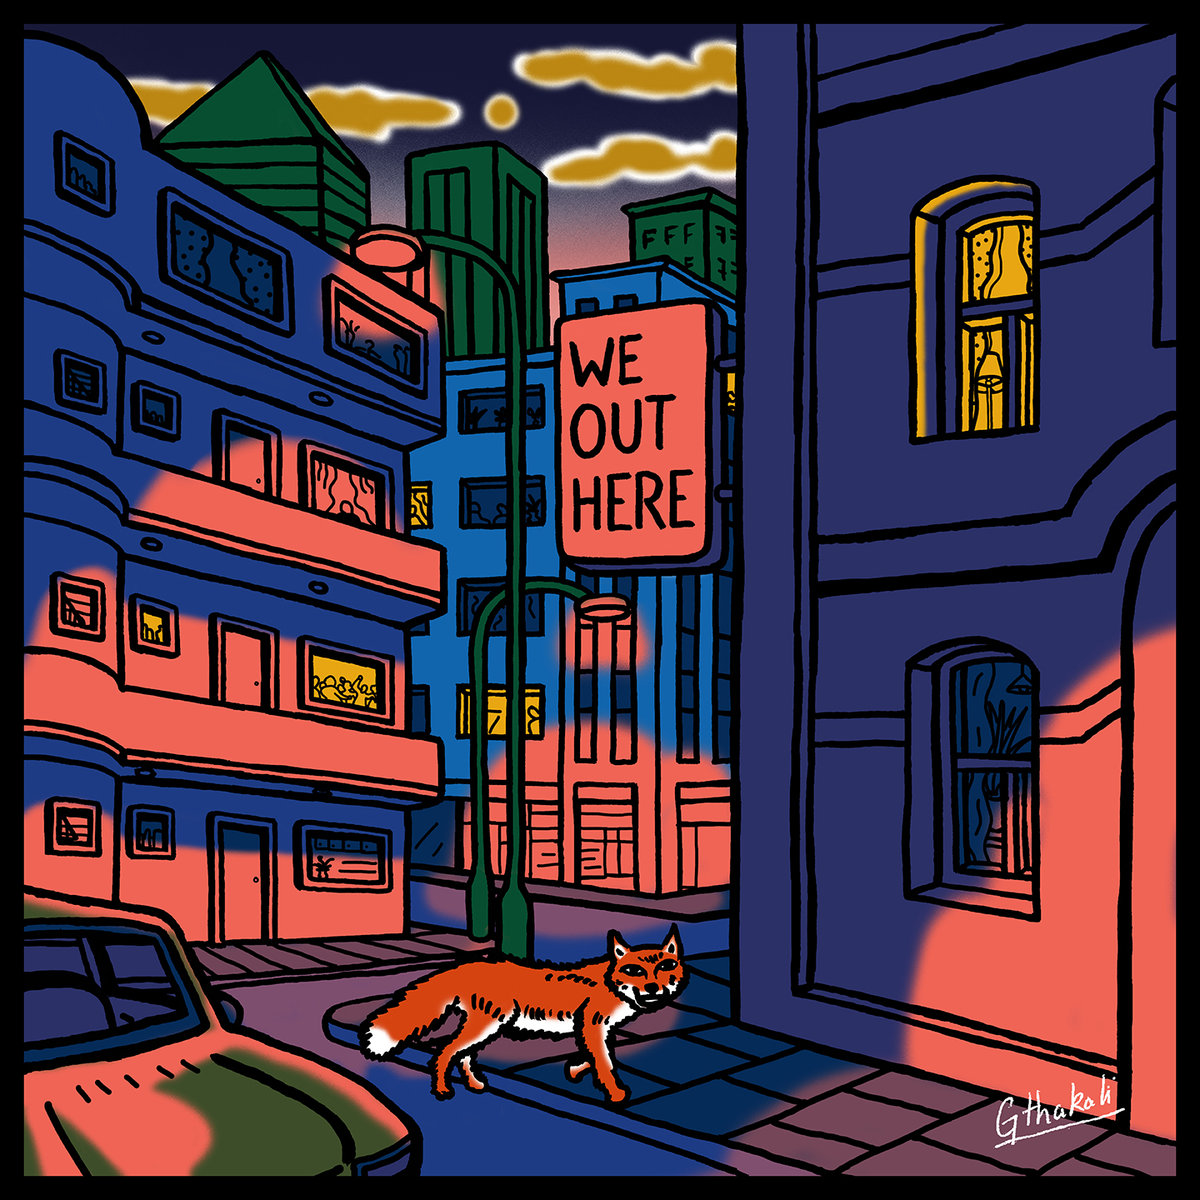 Album of the week: Various artists – We out here